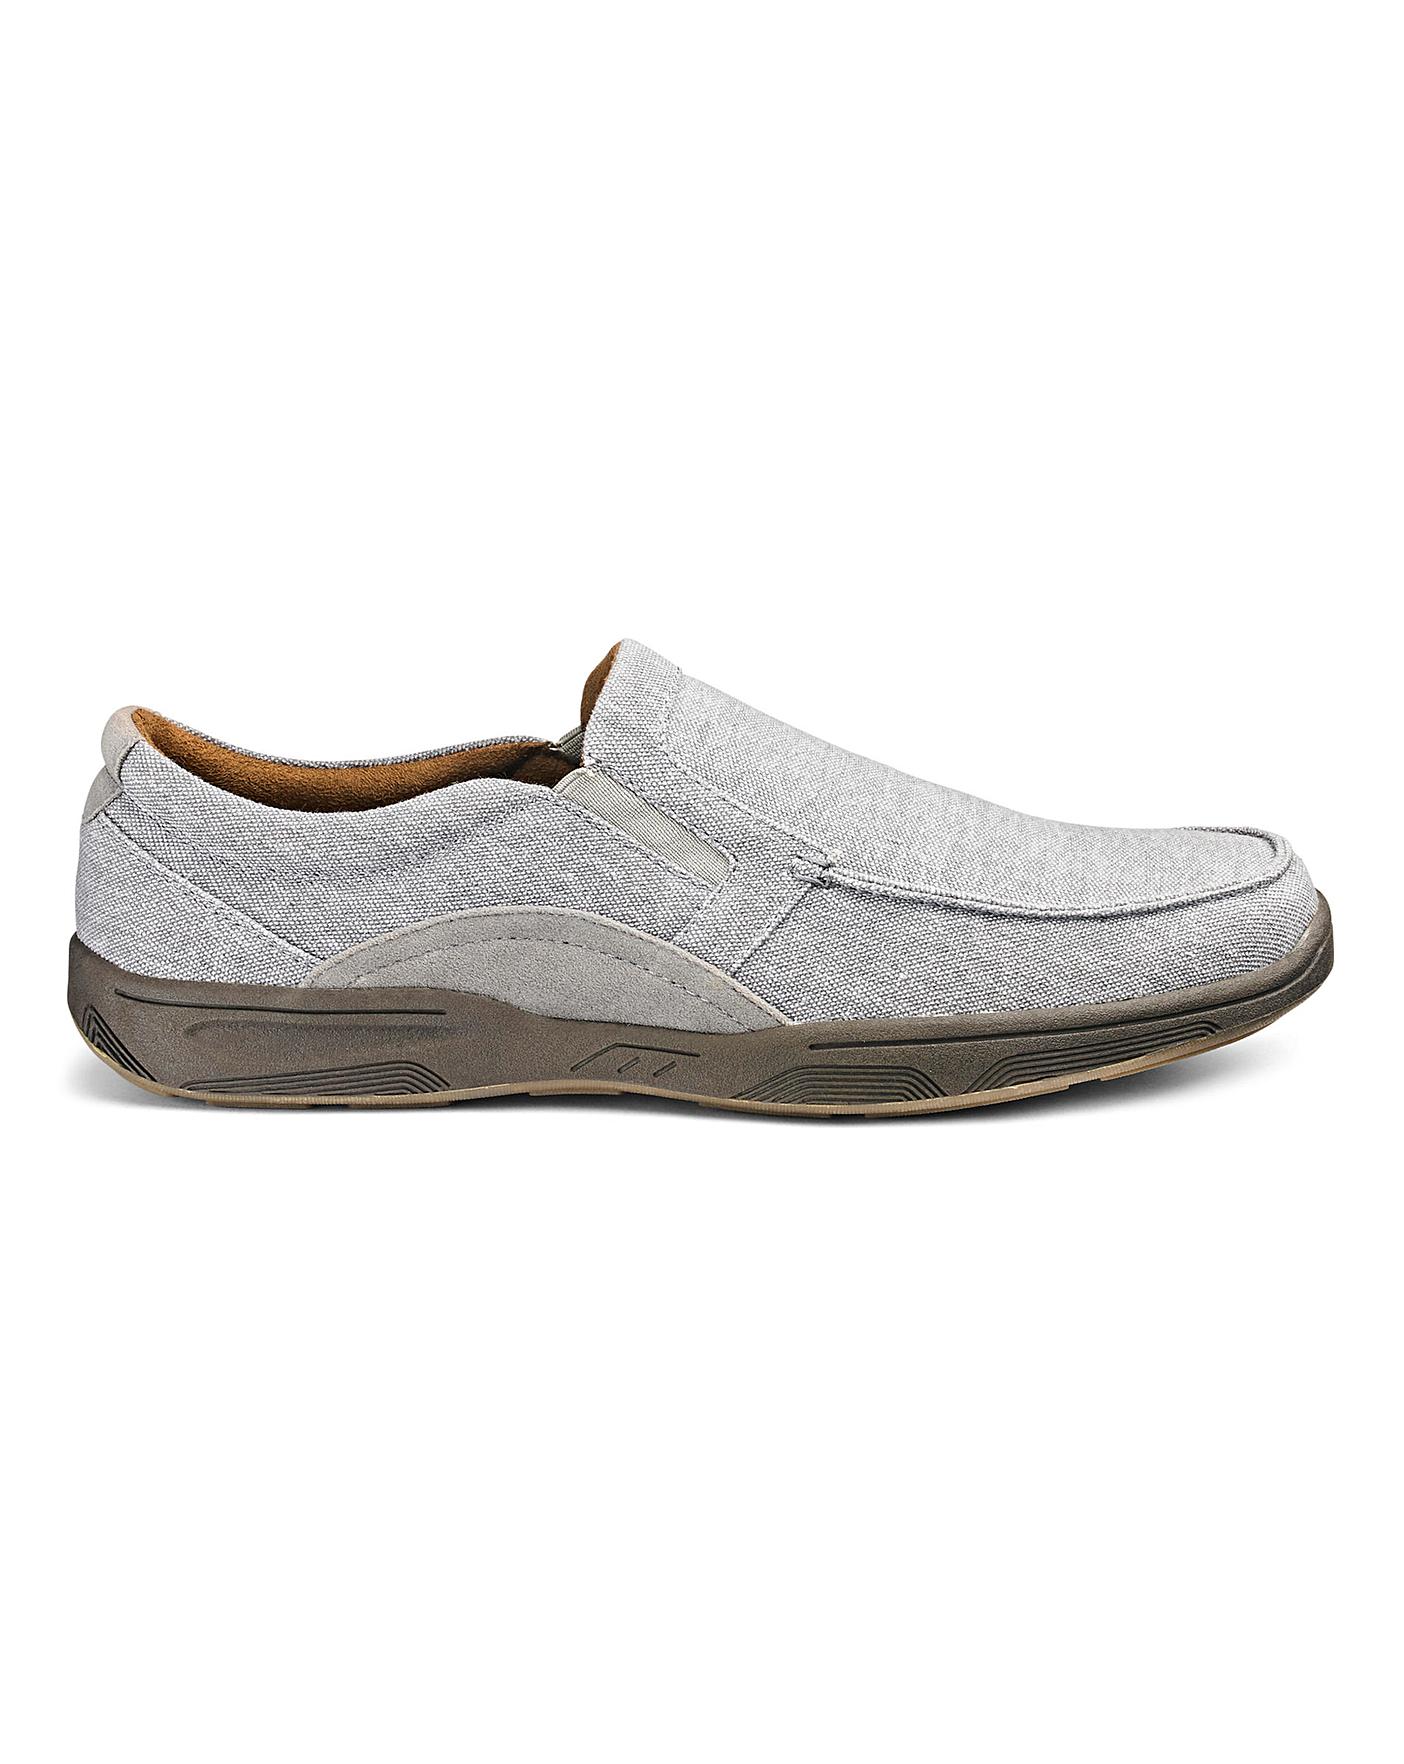 Canvas Slip On Shoes Standard Fit